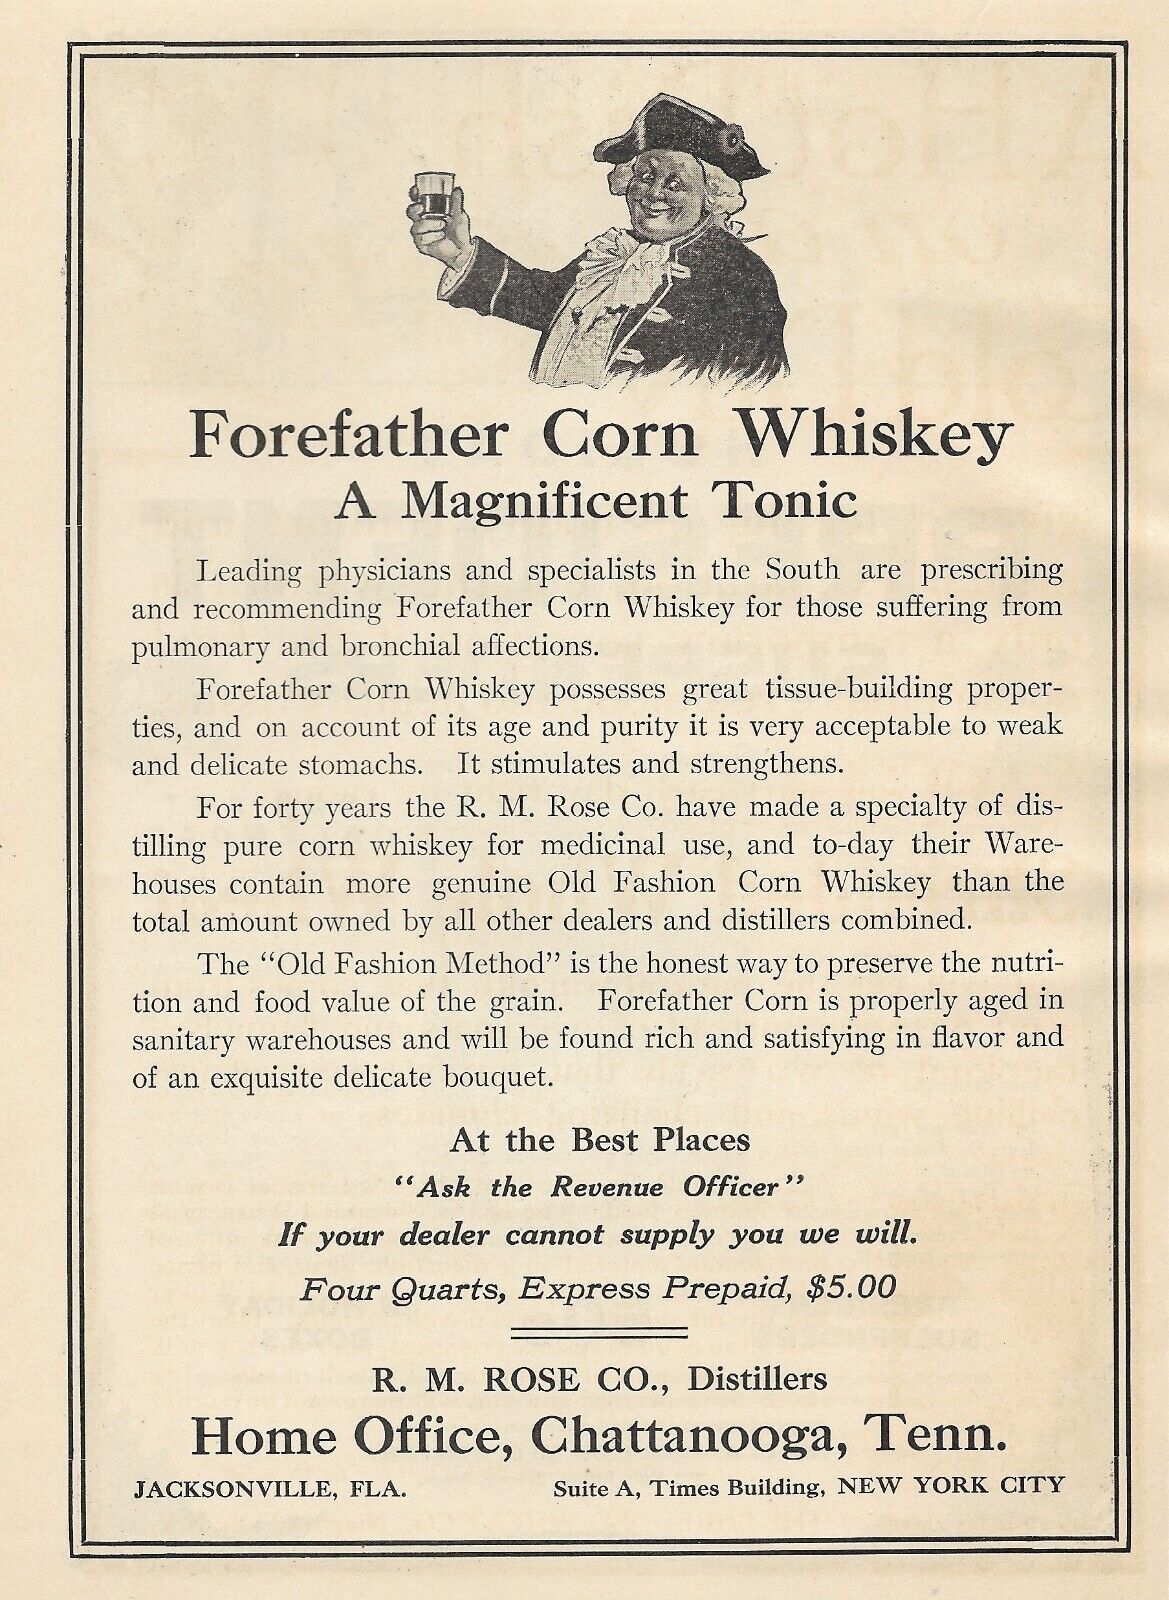 Antique 1900's Alcohol - Forefather Corn Whiskey - Magnificent Tonic  - 1908 AD